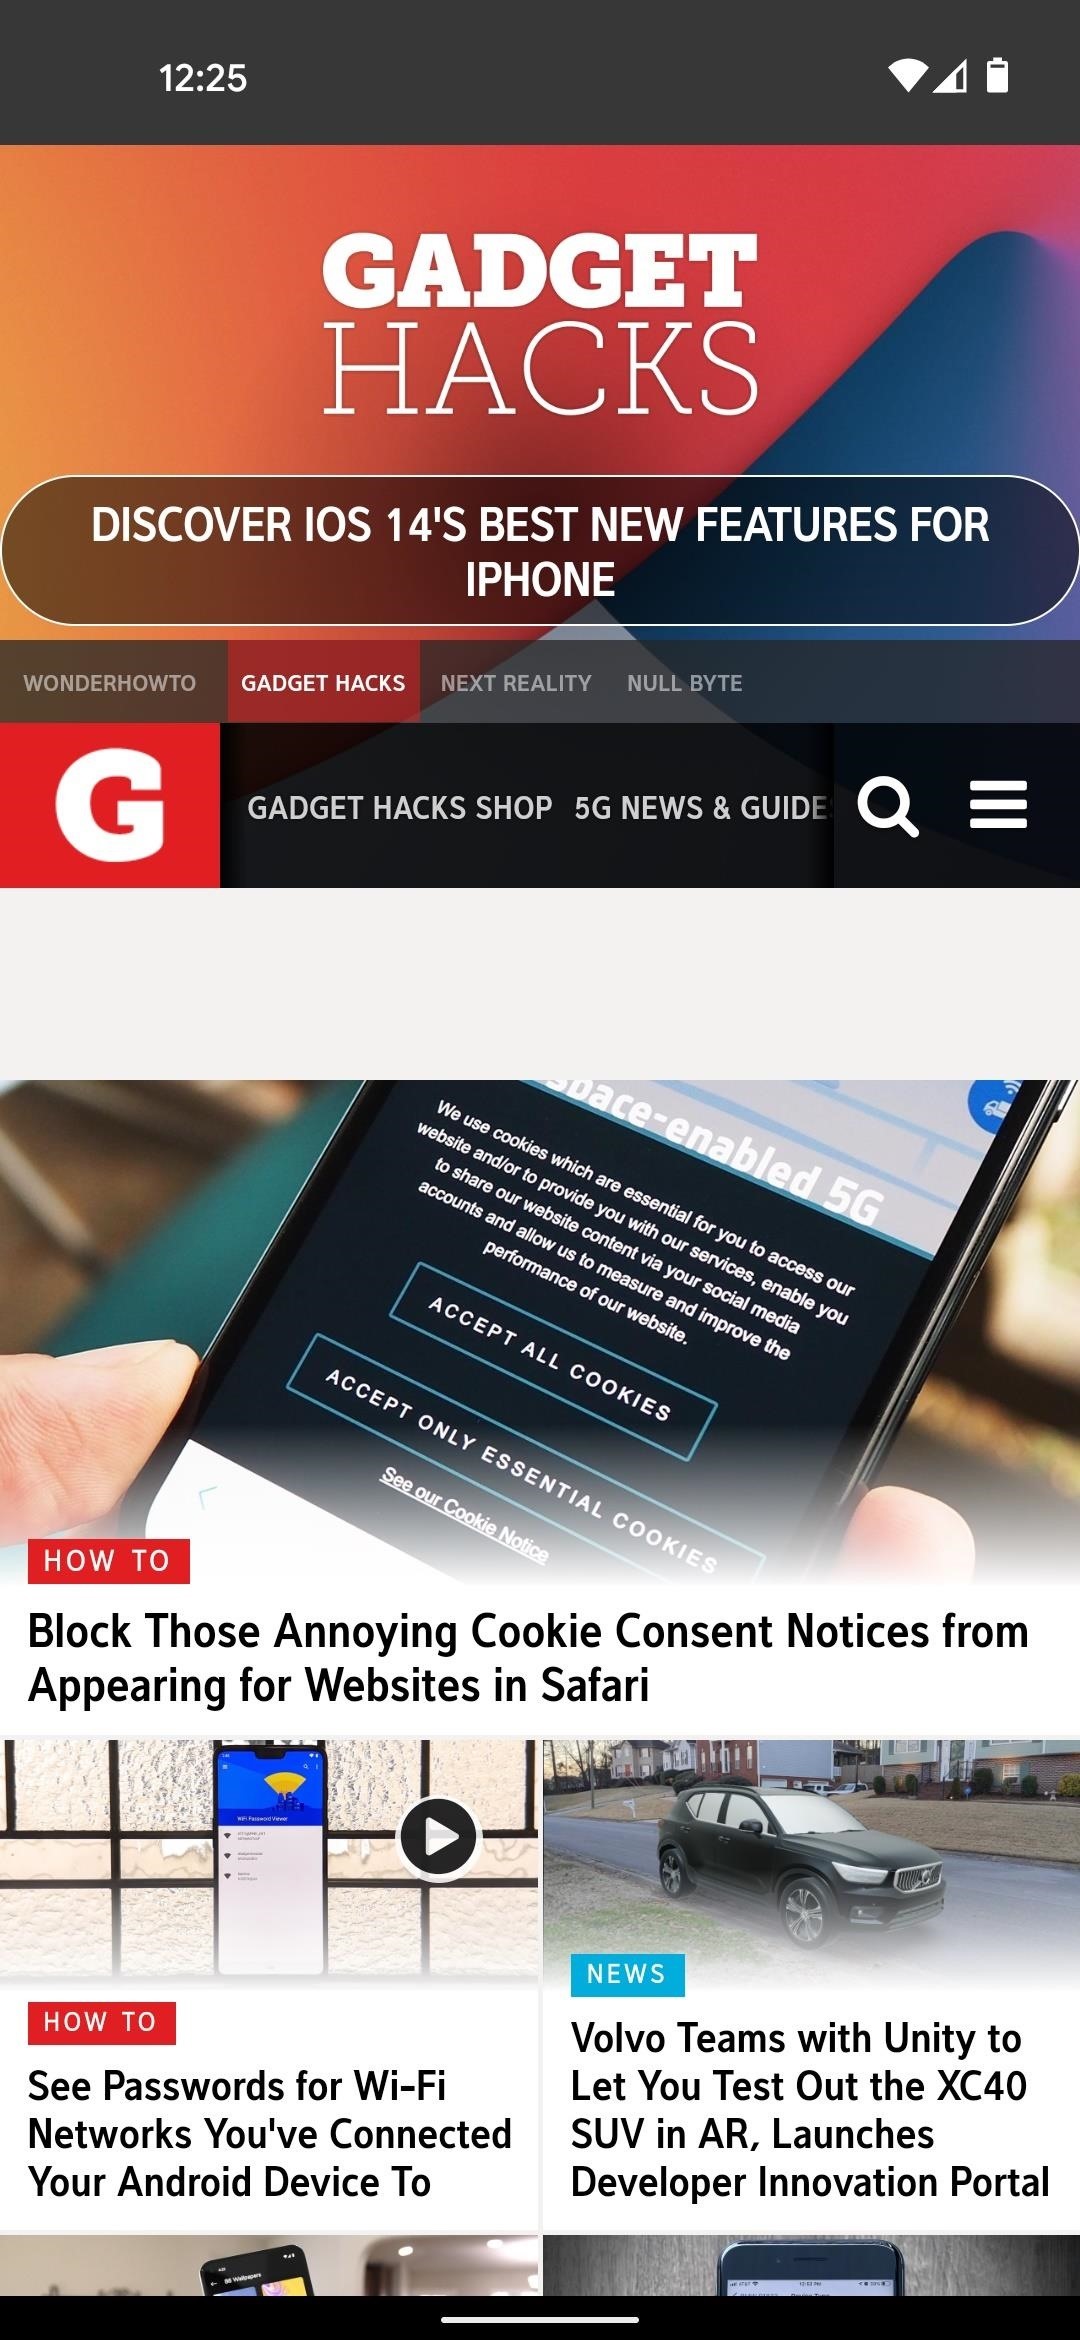 How to Turn Any Website into a Full-Screen Android App with Ad Blocking, Dark Mode & More